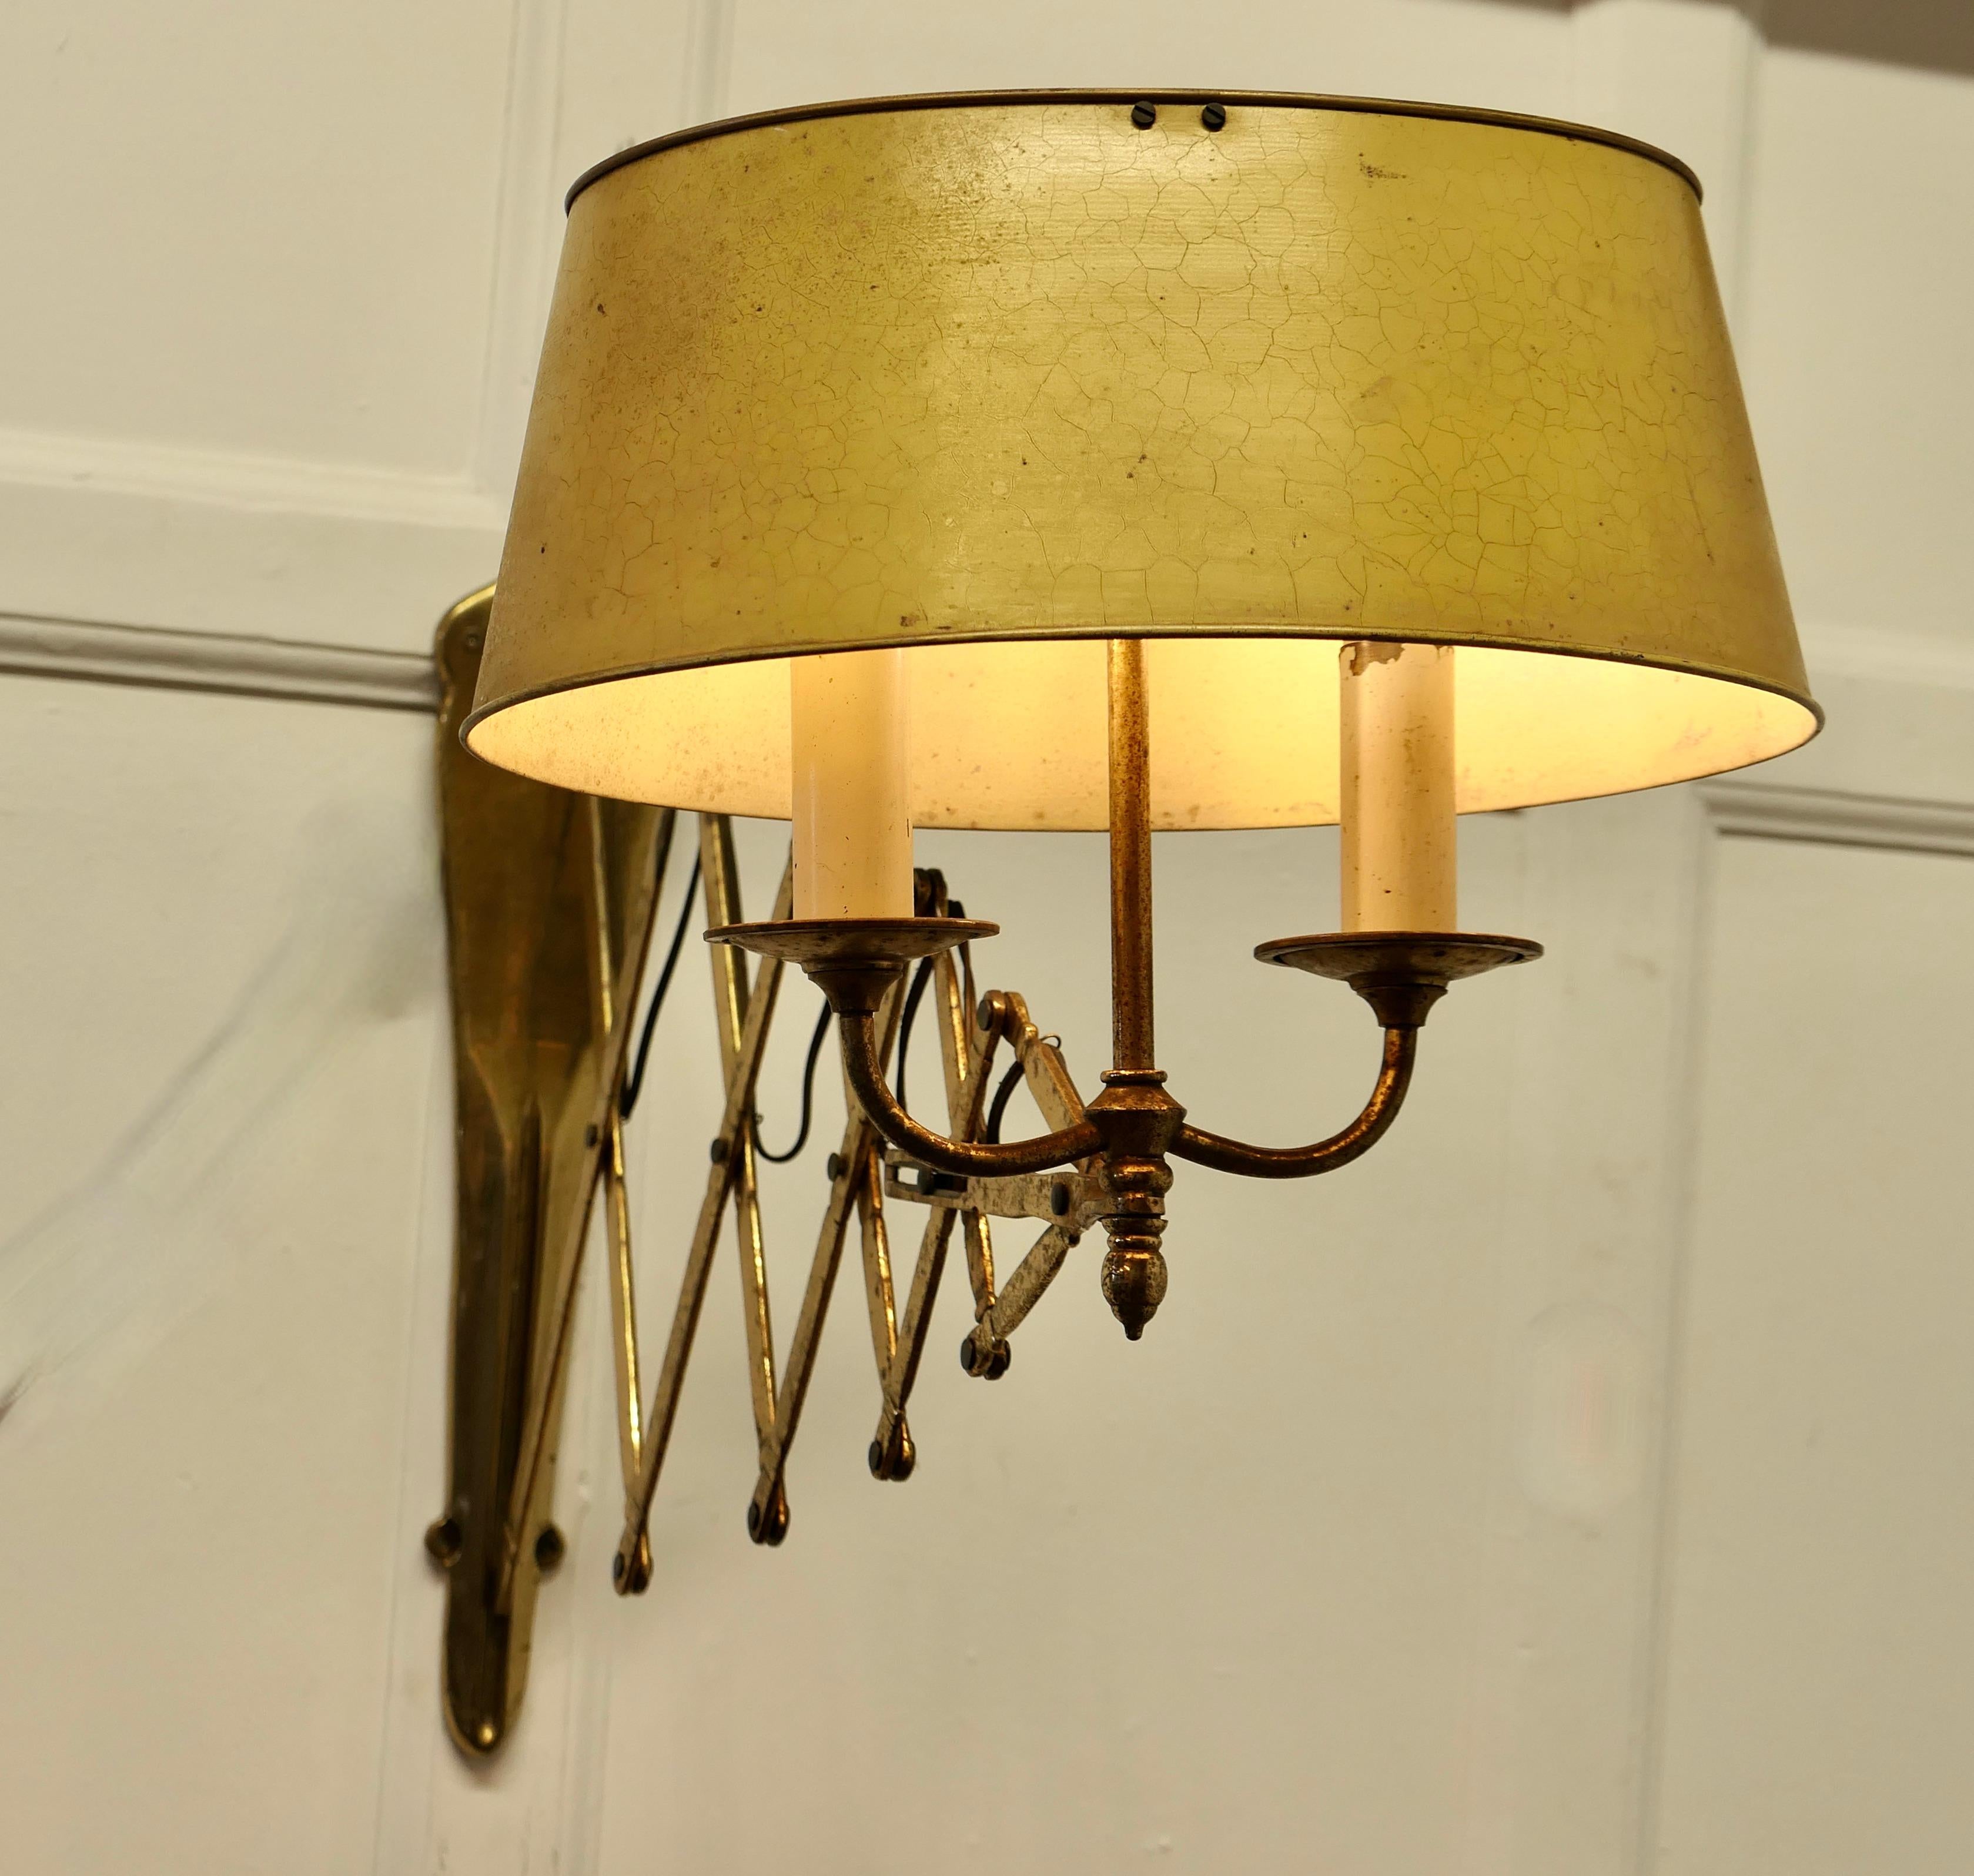 French Painted Toleware and Brass Twin Scissor Lamp
A lovely piece, the brass twin sconce lamp comes with its original adjustable oval toleware shade, this is in cream with crackle finish paint
The lamp fixed to the wall by a brass scissor bracket,